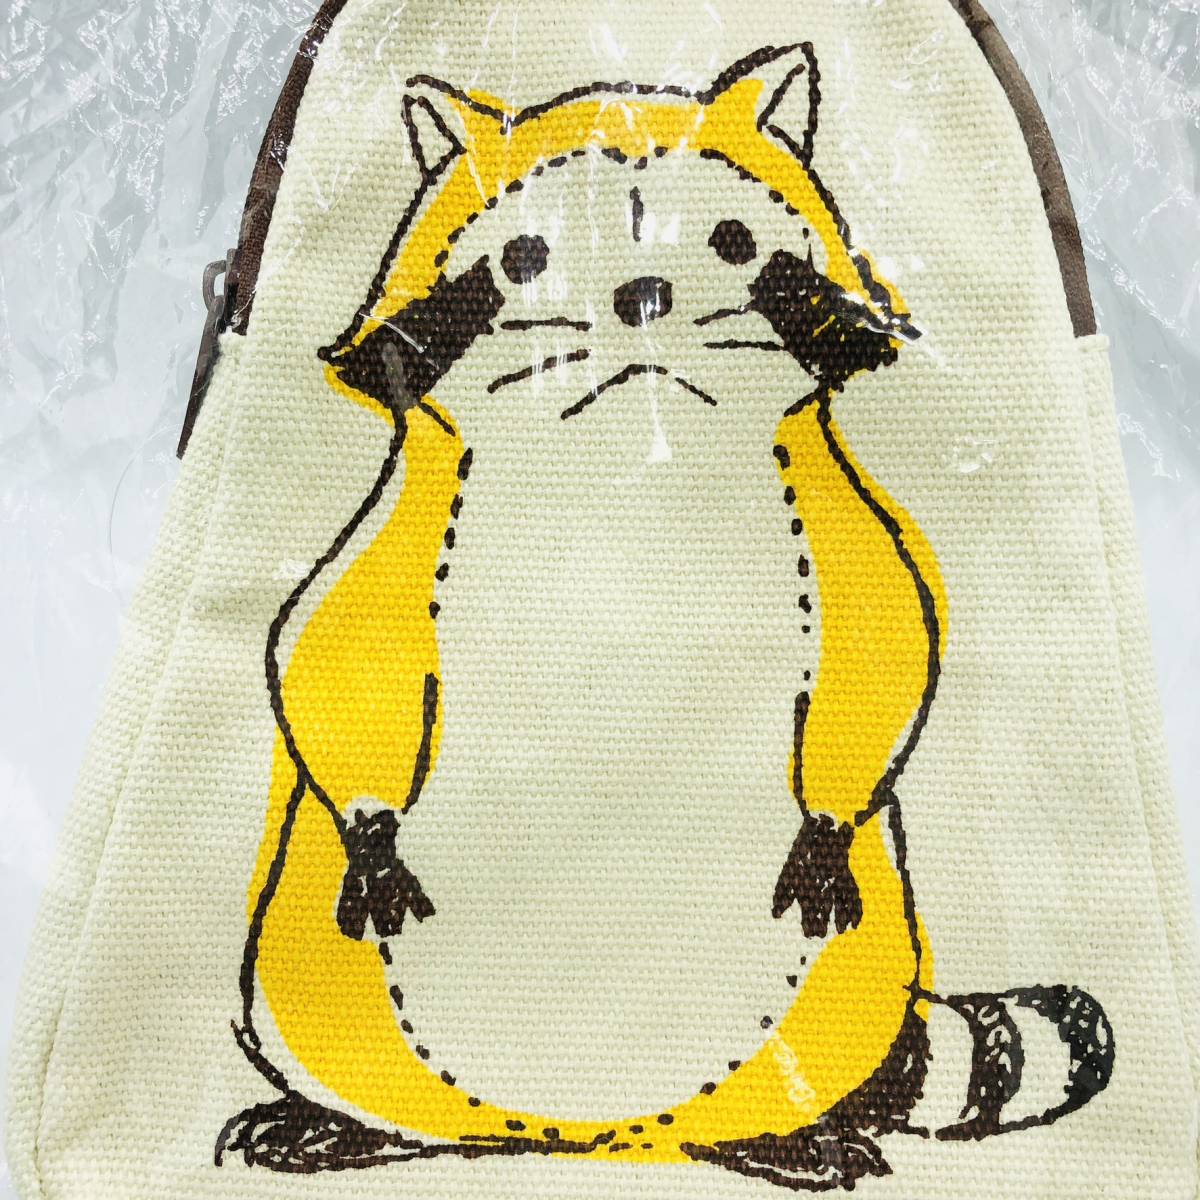  unused goods storage goods Rascal the Raccoon pouch da ikatto 40th case RASCAL lovely character 